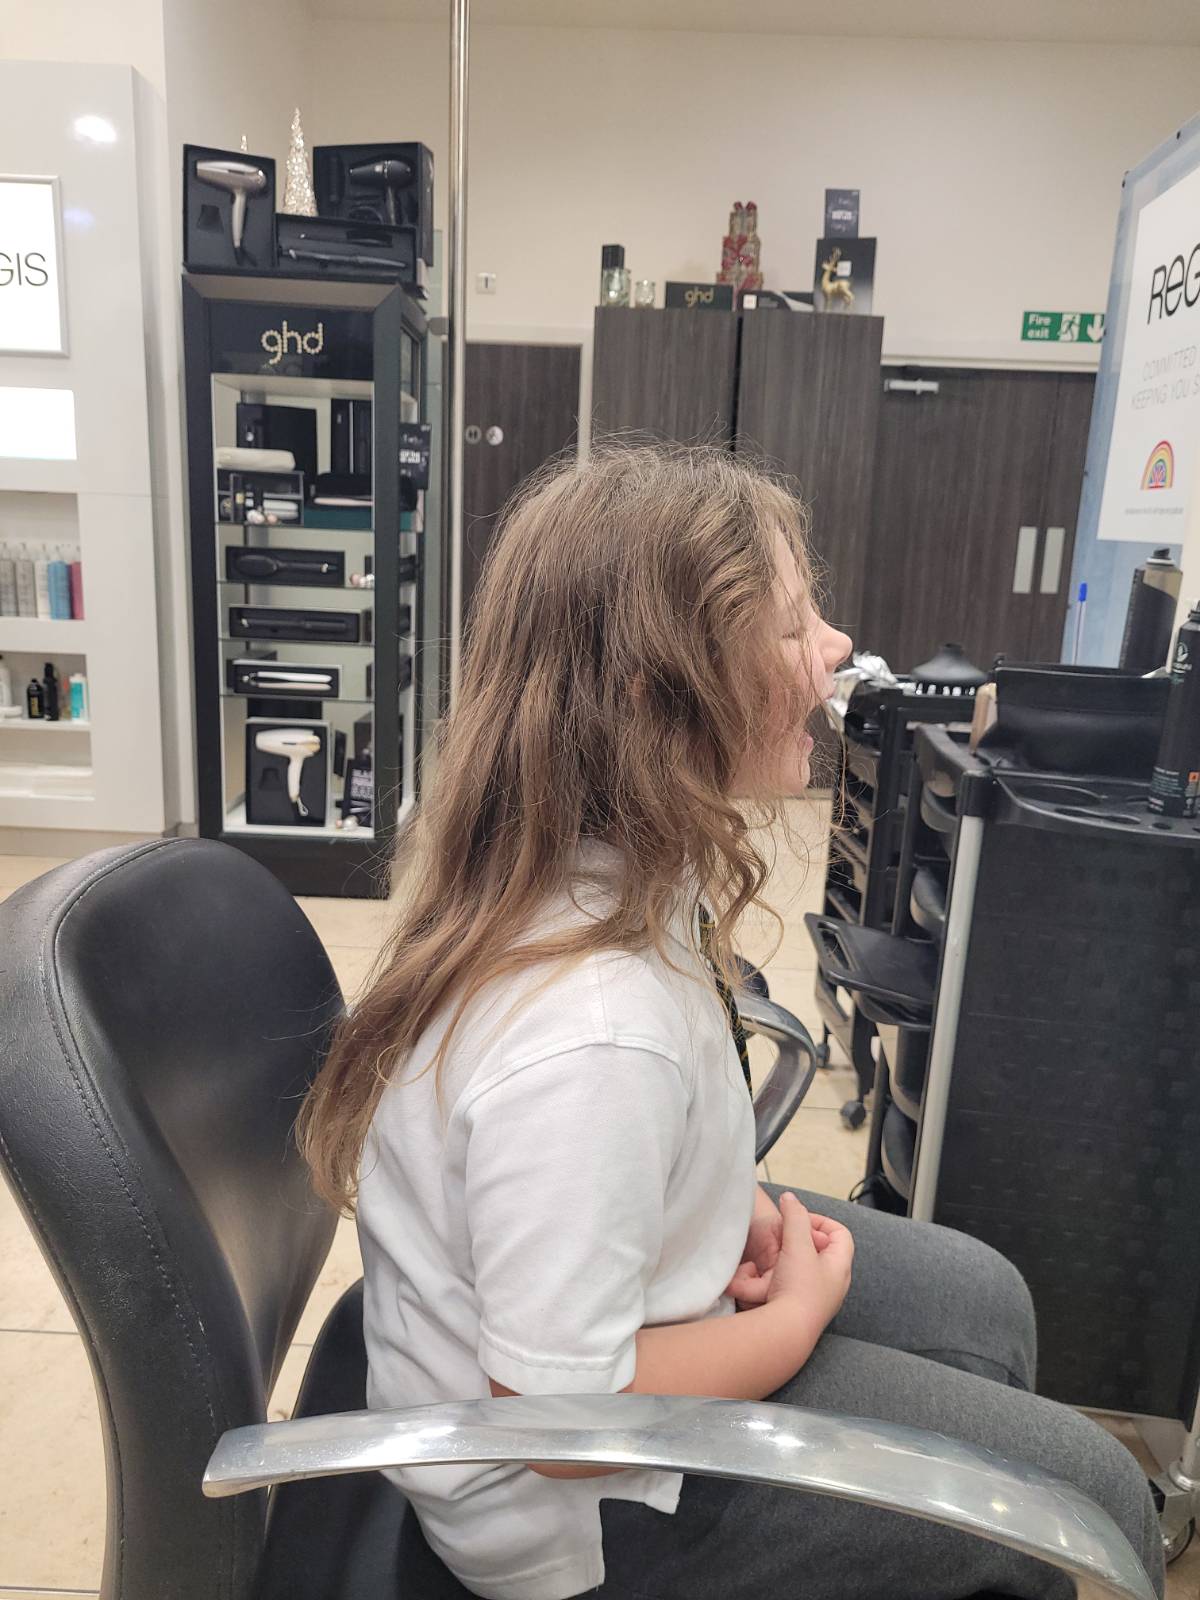 Genie-Jo only 7 years old has donated her never cut hair a massive 25cm of wavy hair